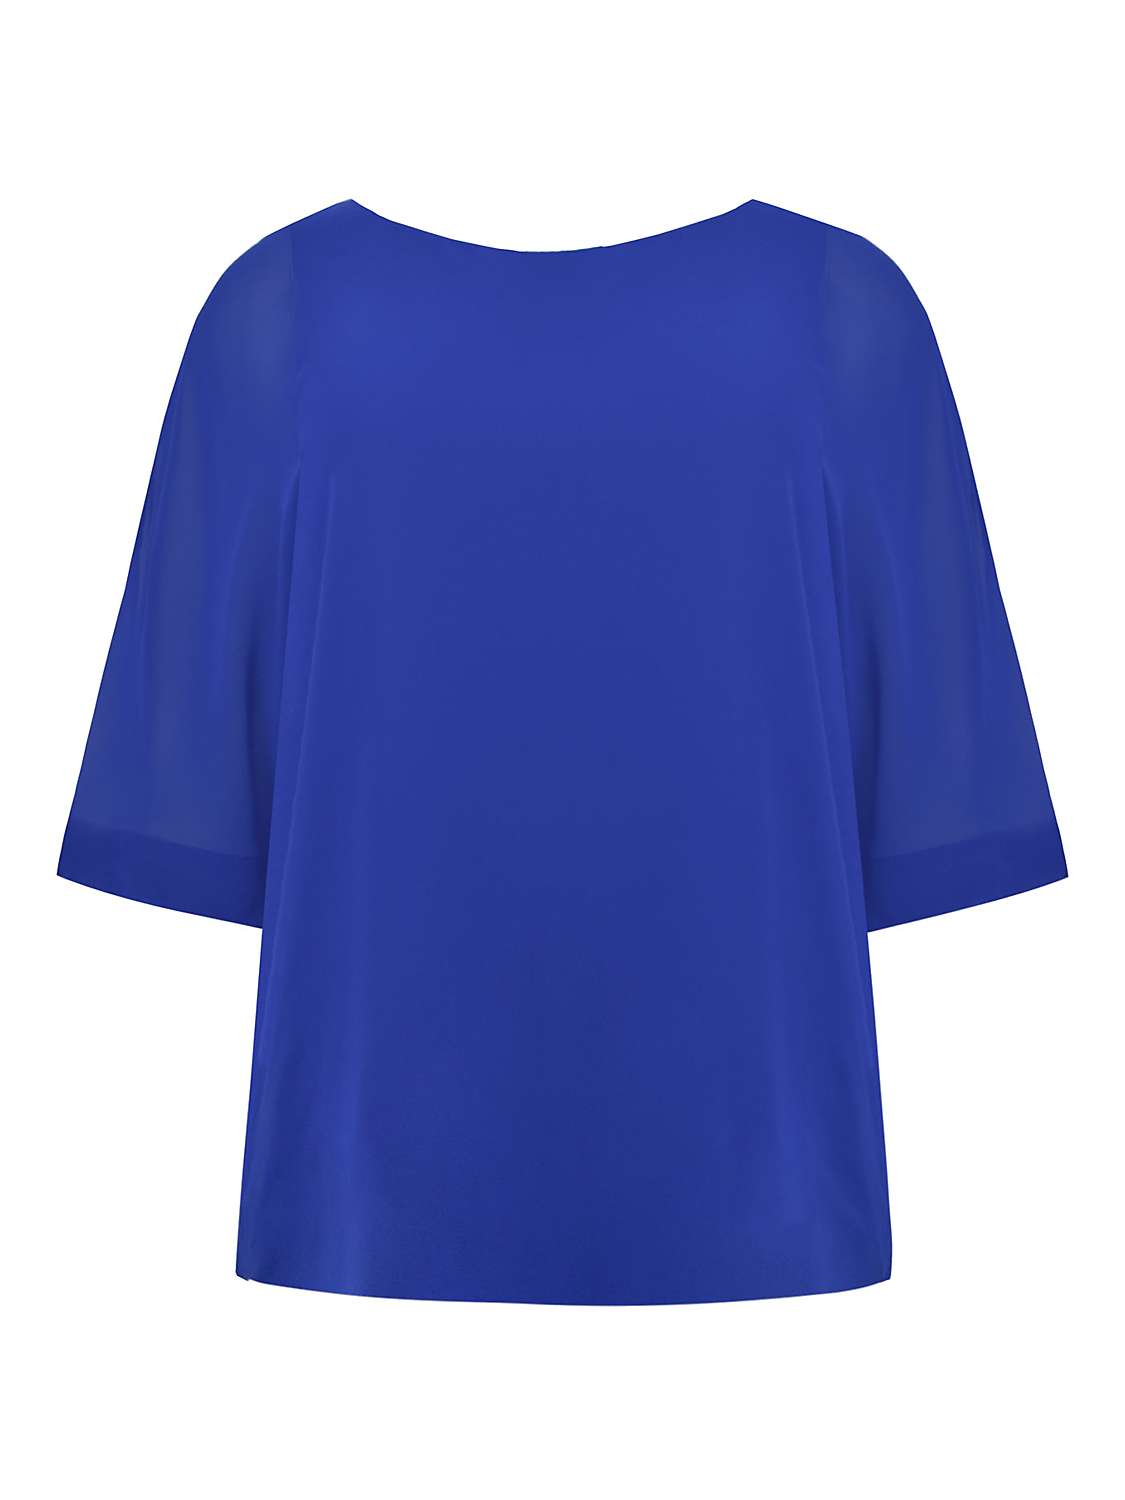 Buy Live Unlimited Curve Chiffon Overlay Top, Blue Online at johnlewis.com